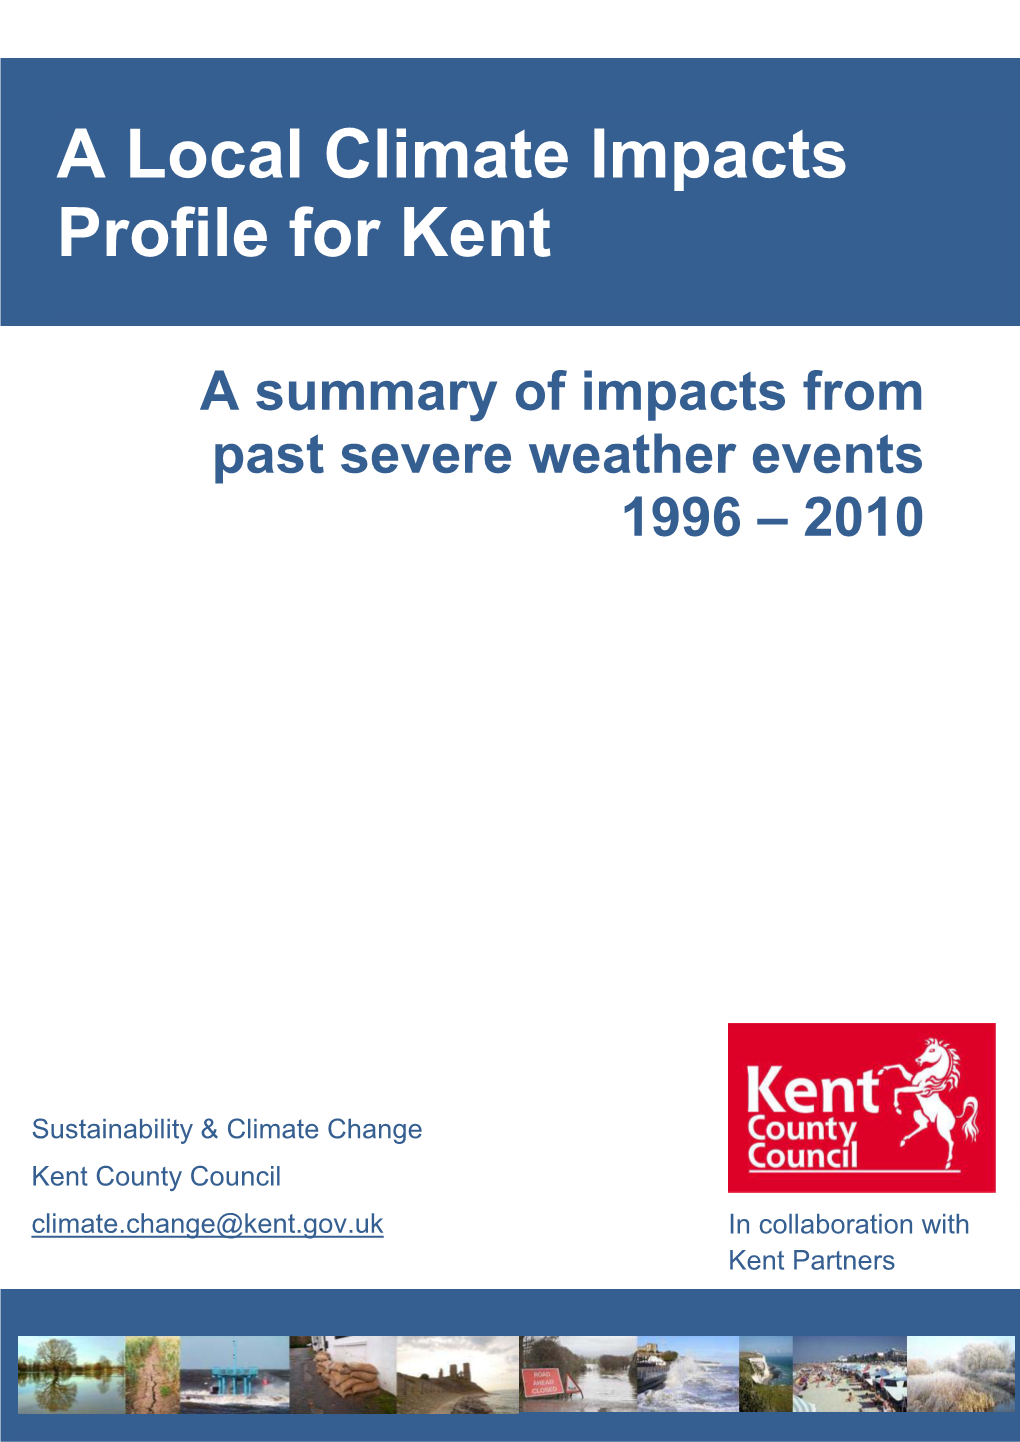 A Local Climate Impacts Profile for Kent